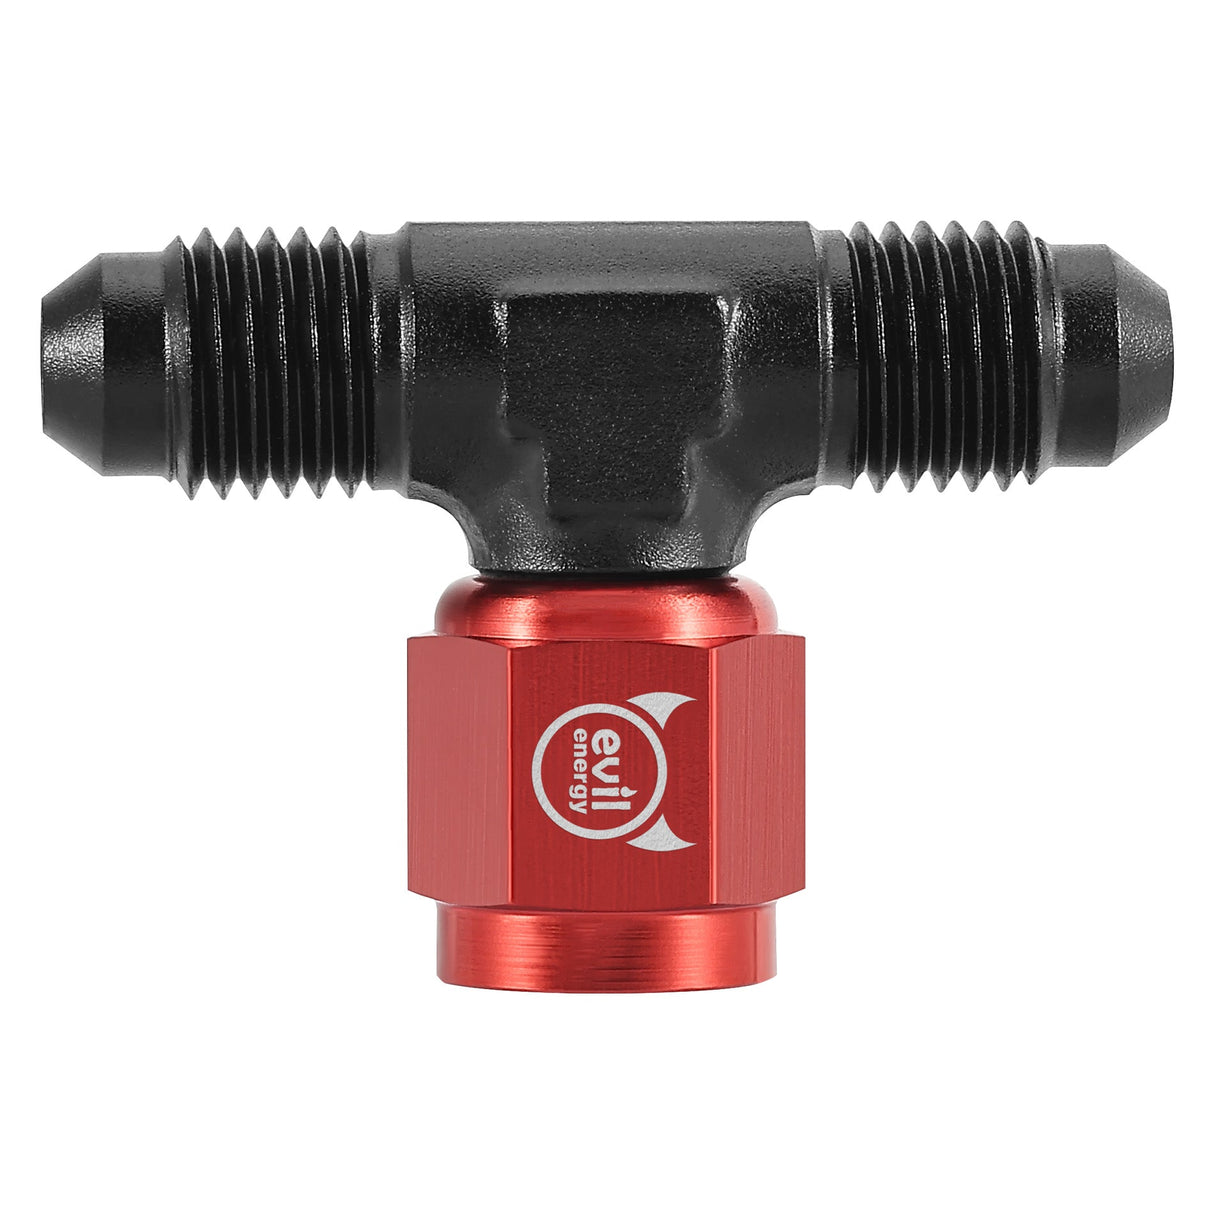 EVIL ENERGY AN Male Tee Fitting Adaptor with Female Swivel on Side Red&Black（4/6/8/10AN）